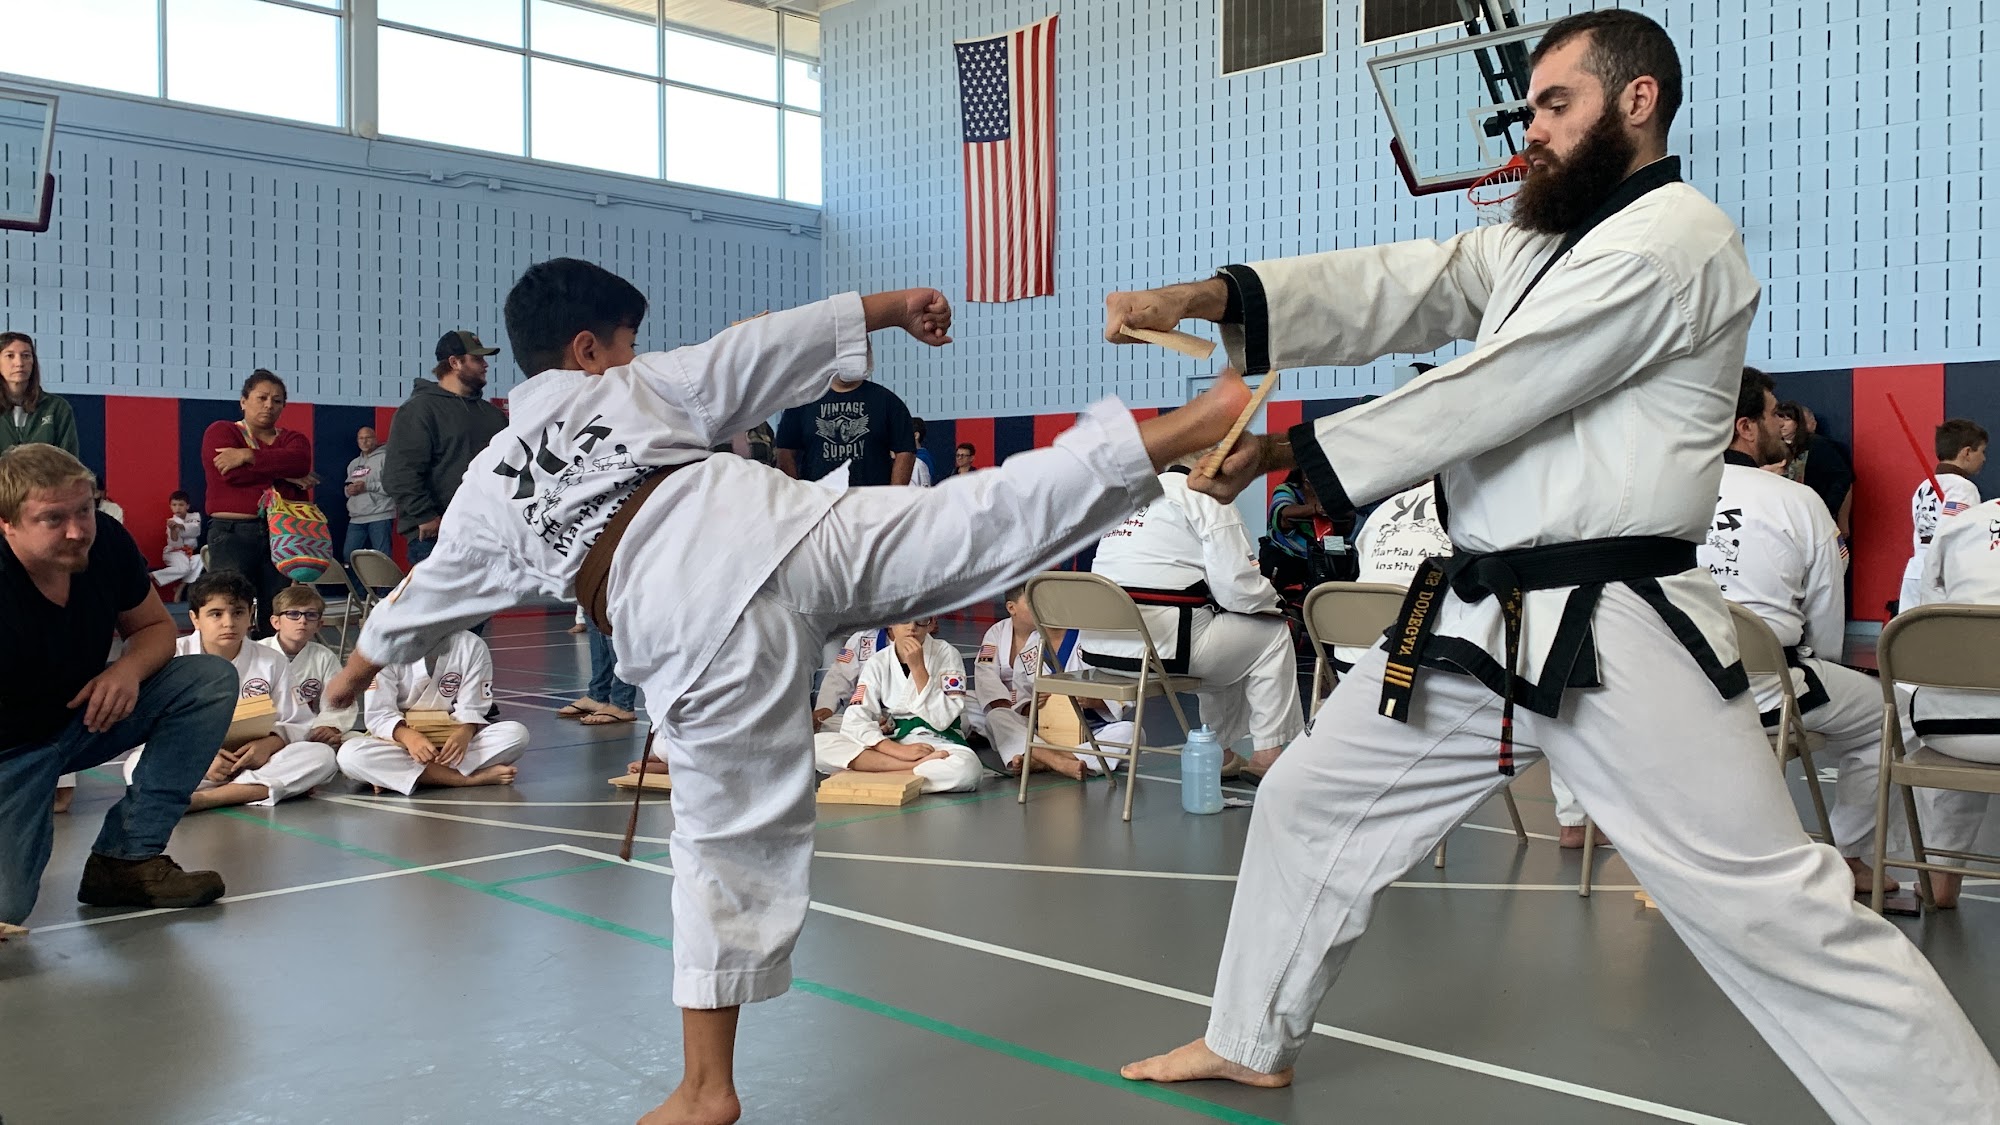 Yi's Karate Institute of Woodbury Heights 560 S Evergreen Ave, Woodbury Heights New Jersey 08097